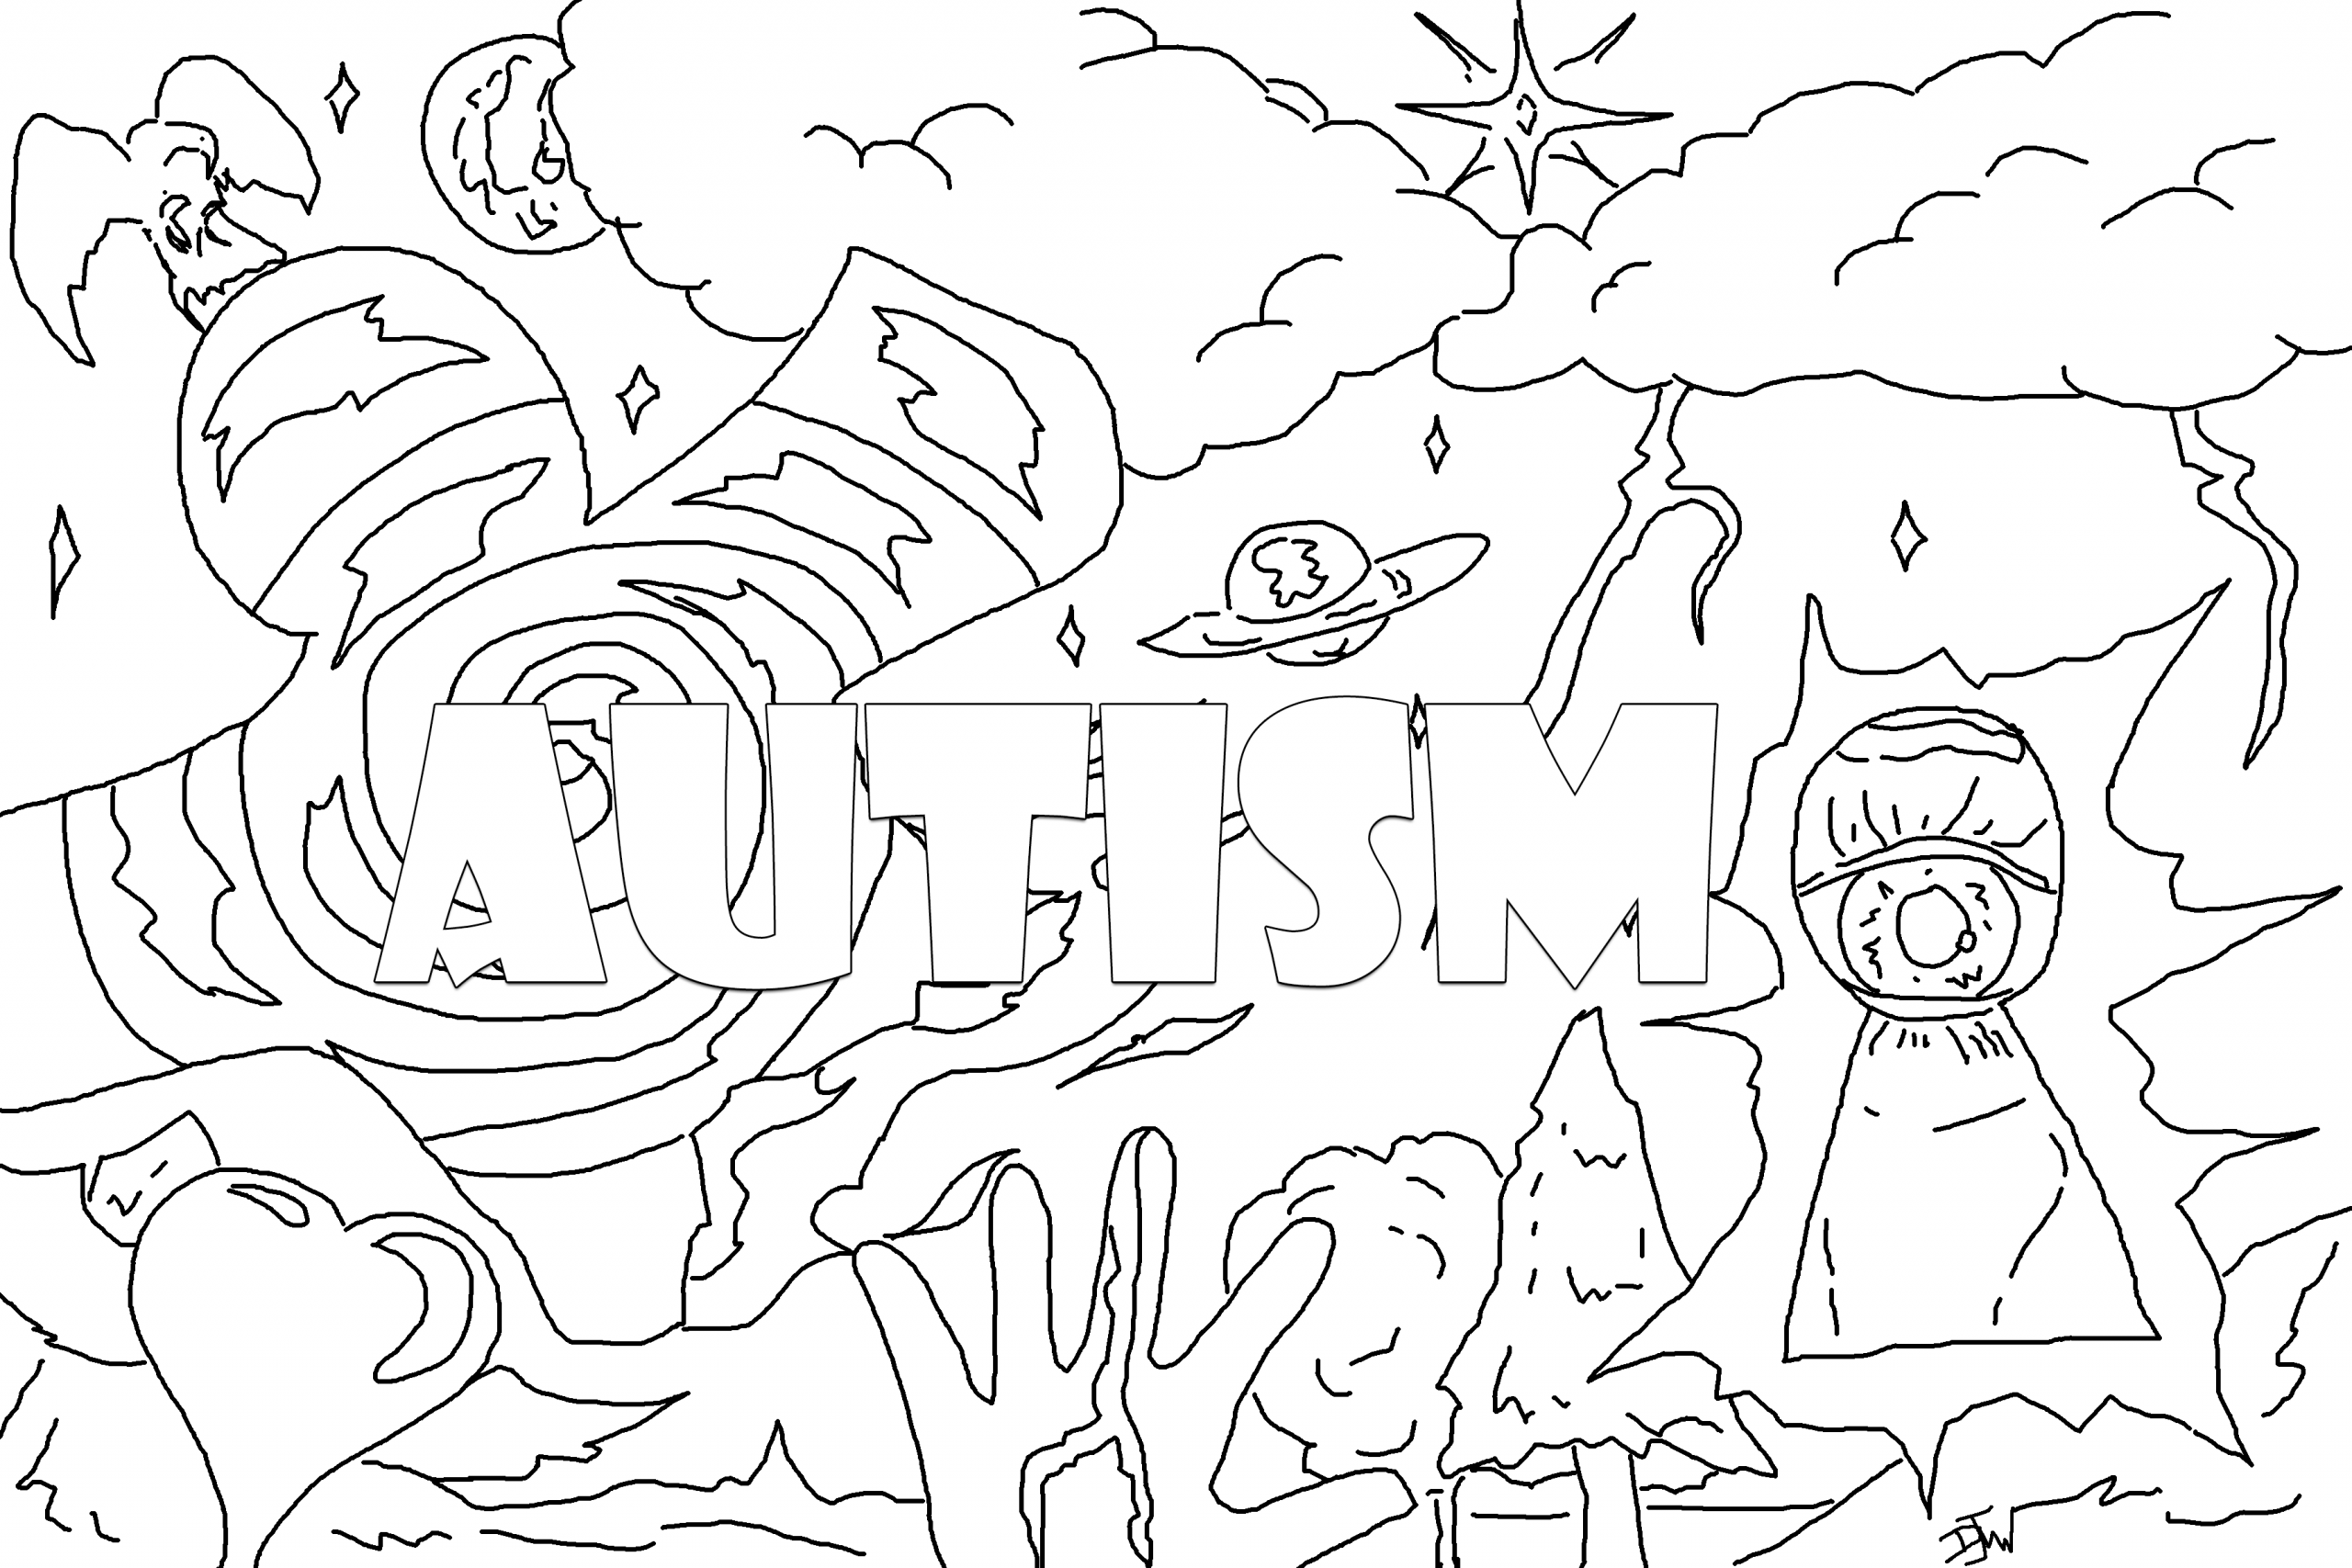 Download Autism Awareness Coloring Pages - Coloring Home